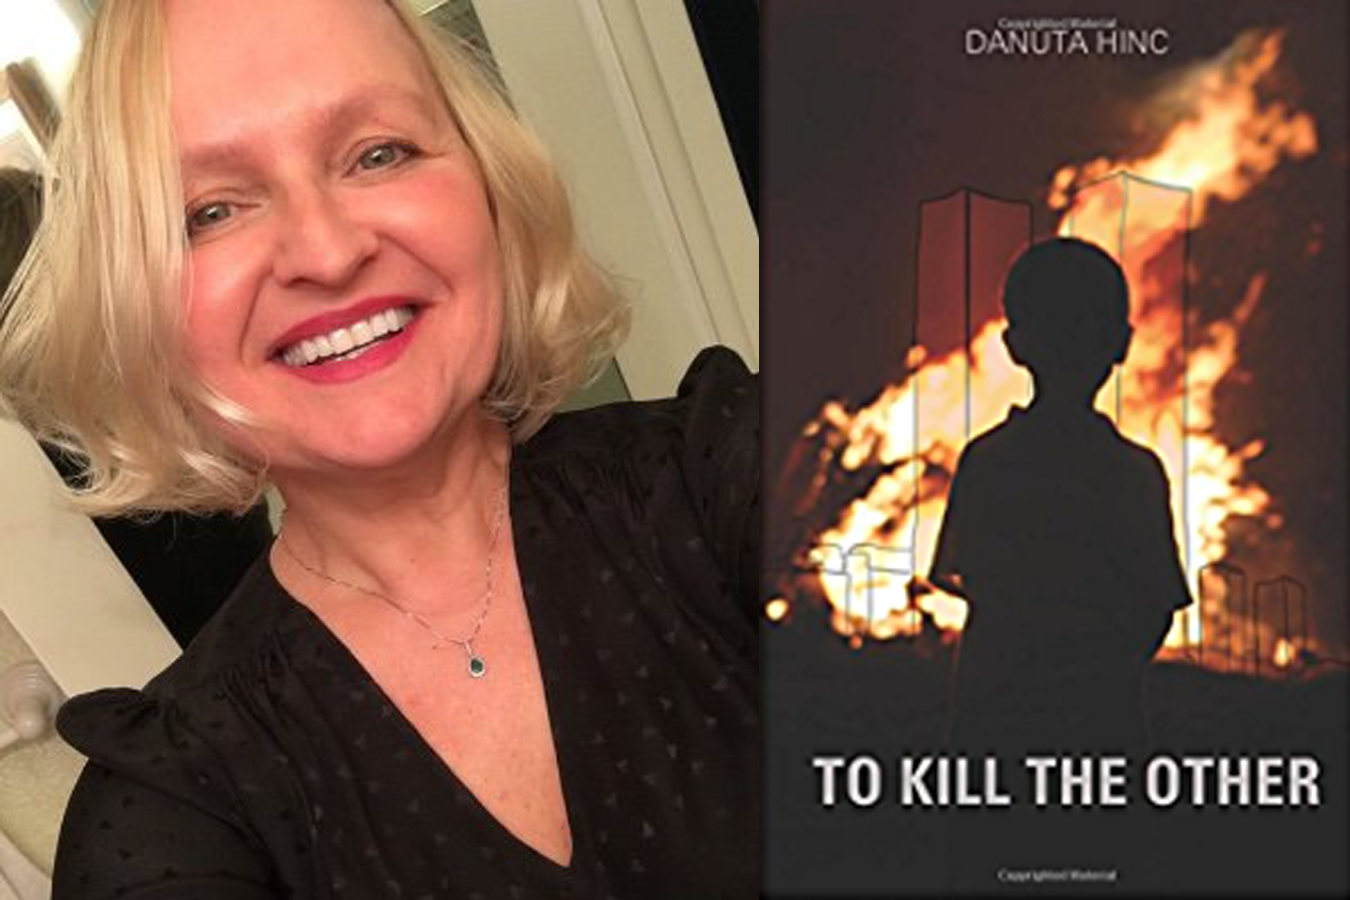 Headshot of Danuta Hinc smiling in a black blouse next to book cover of To Kill the Other